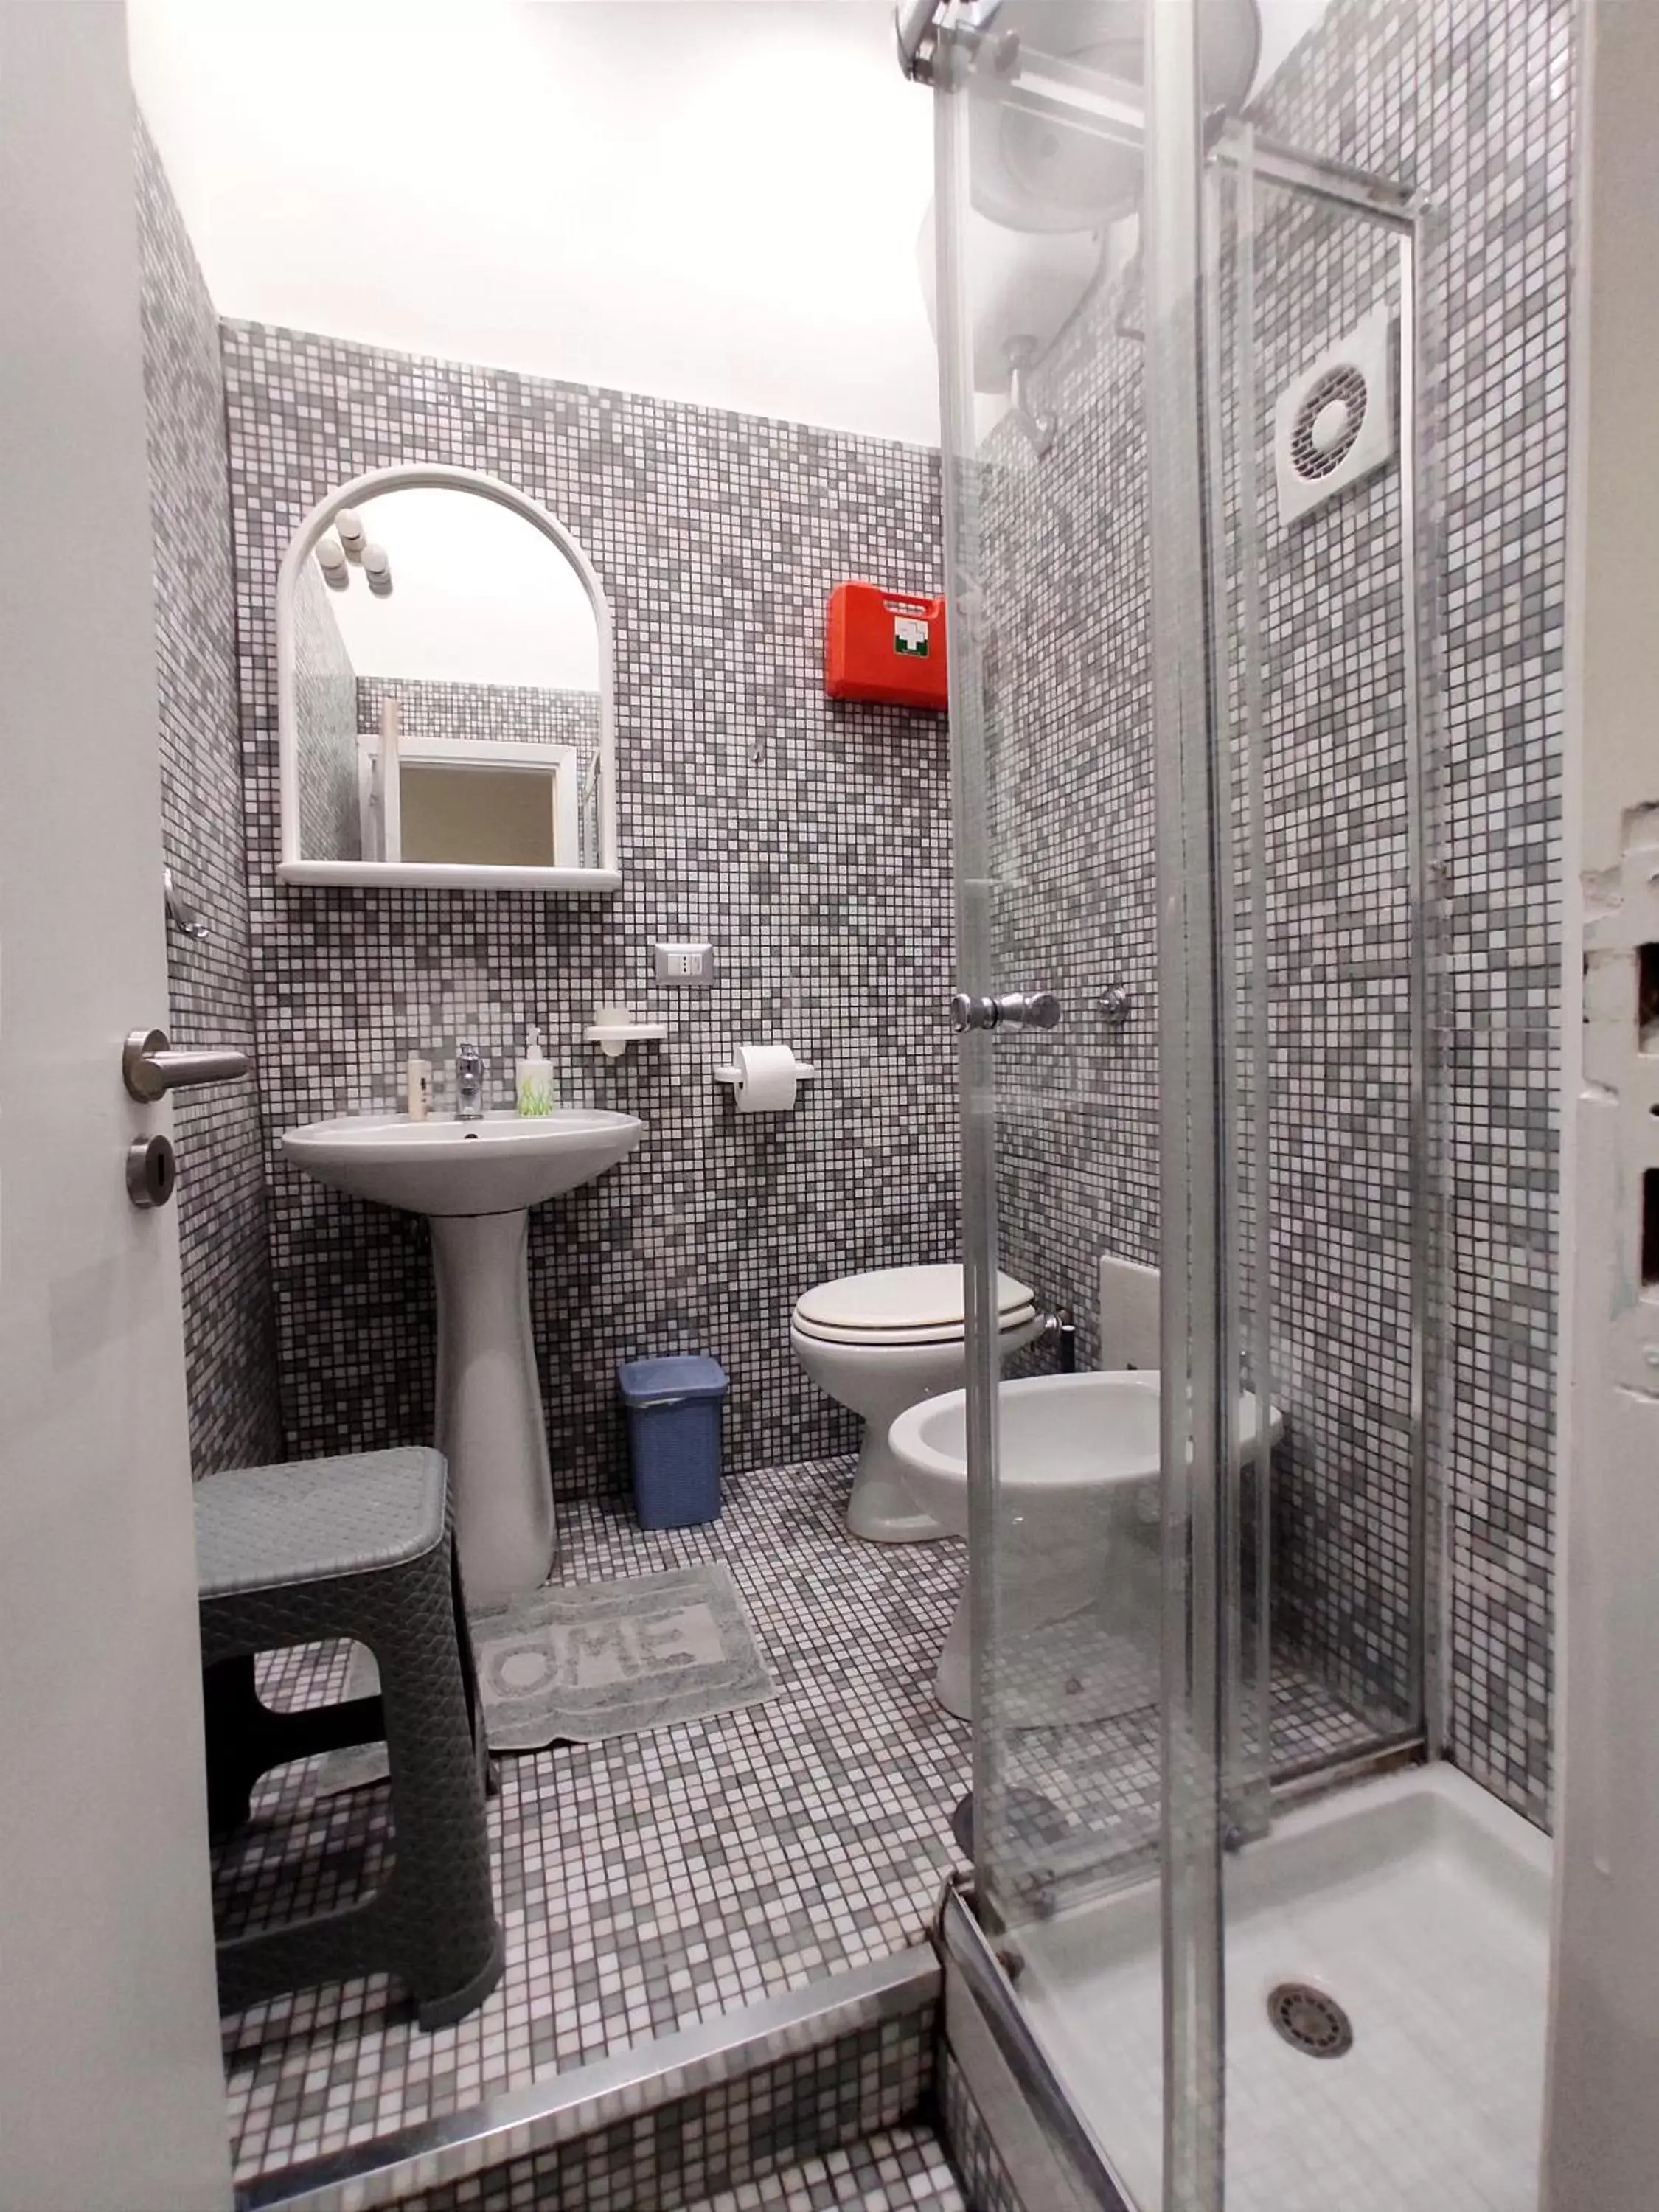 Bathroom in Ale & Tizy House